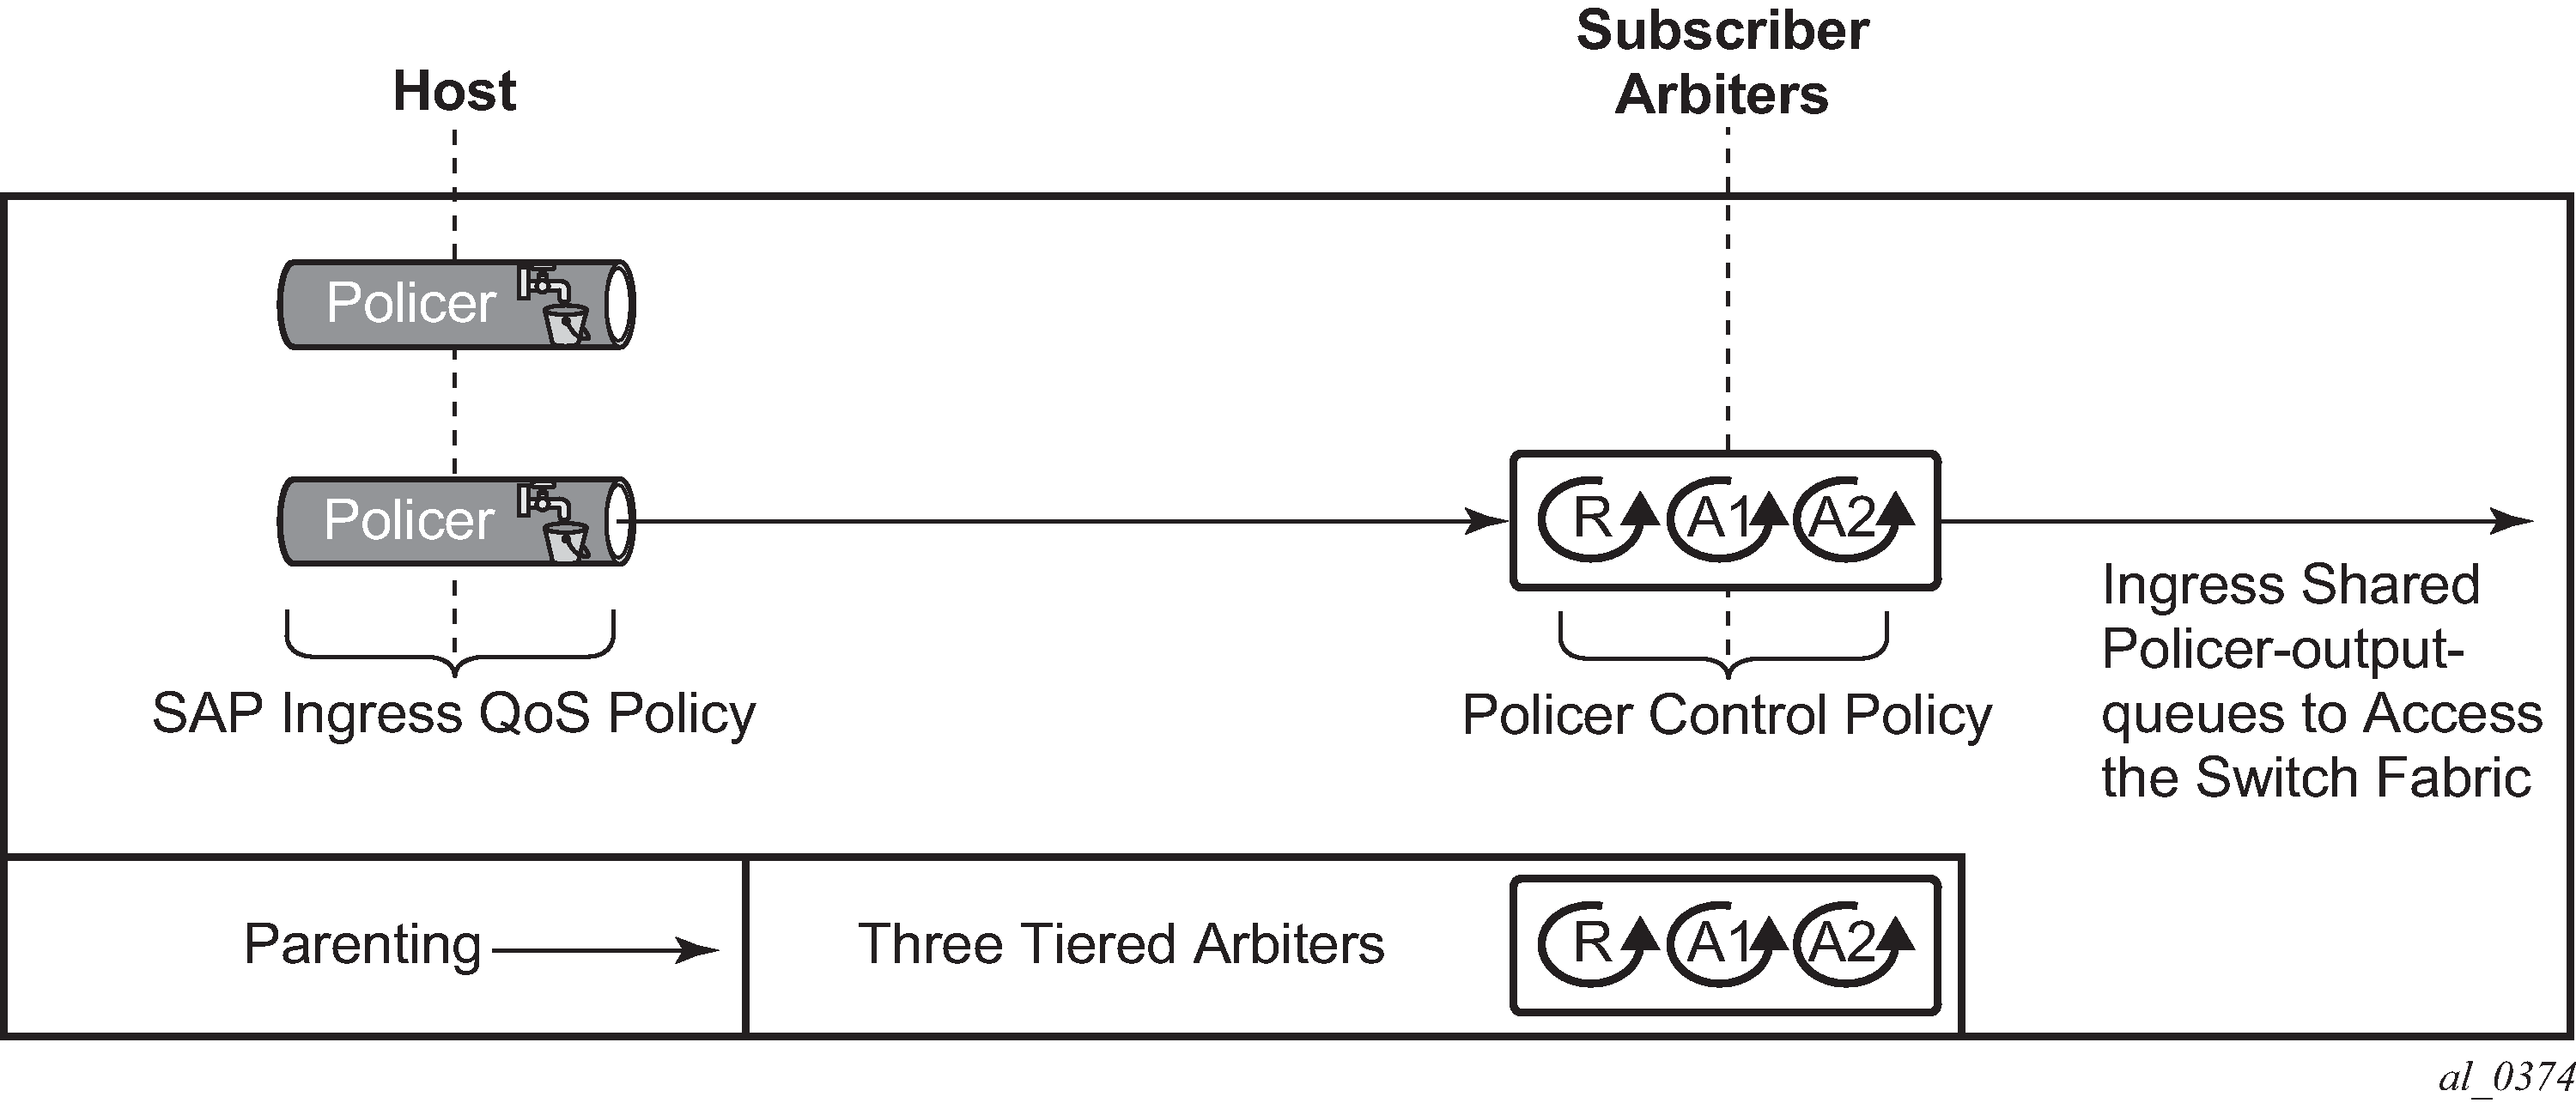 Triple Play Enhanced Subscriber Management